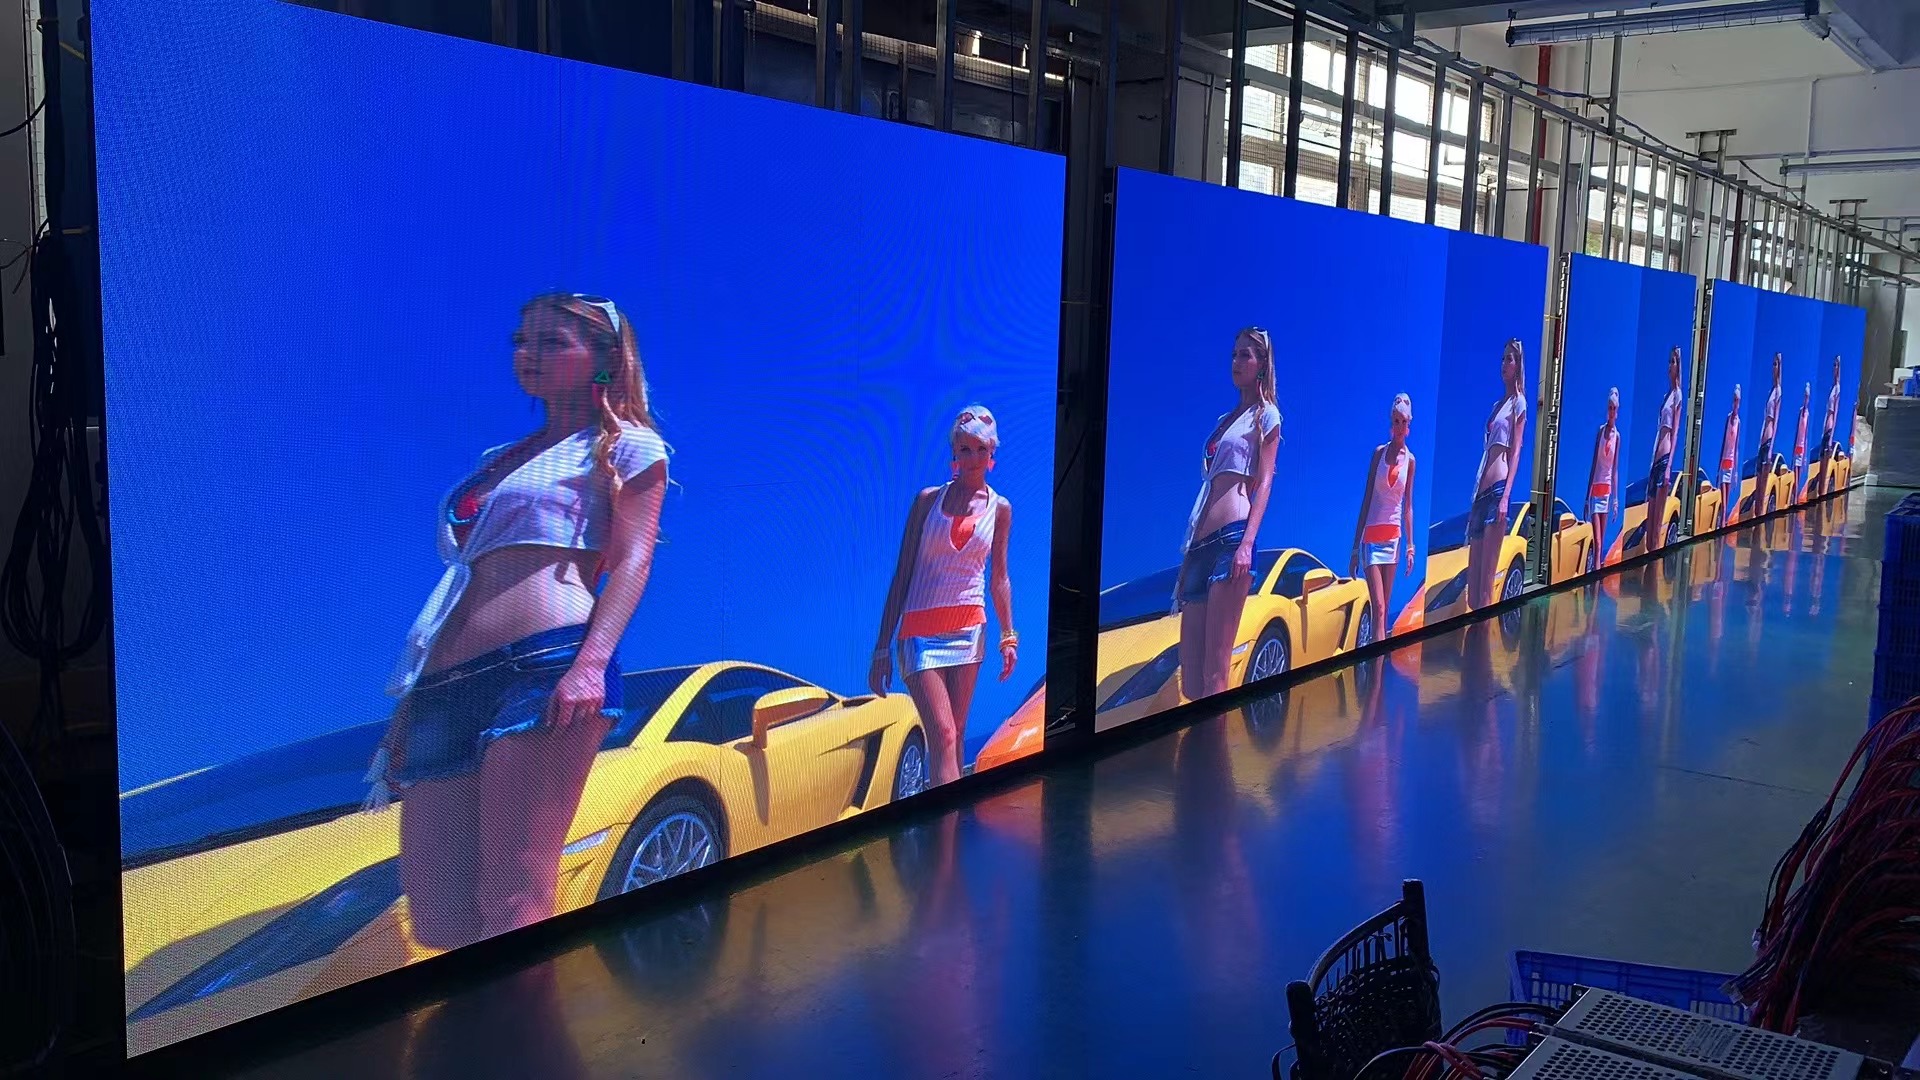 Indoors Advertising Large Giant Led Commercial Screen New Hd Digital